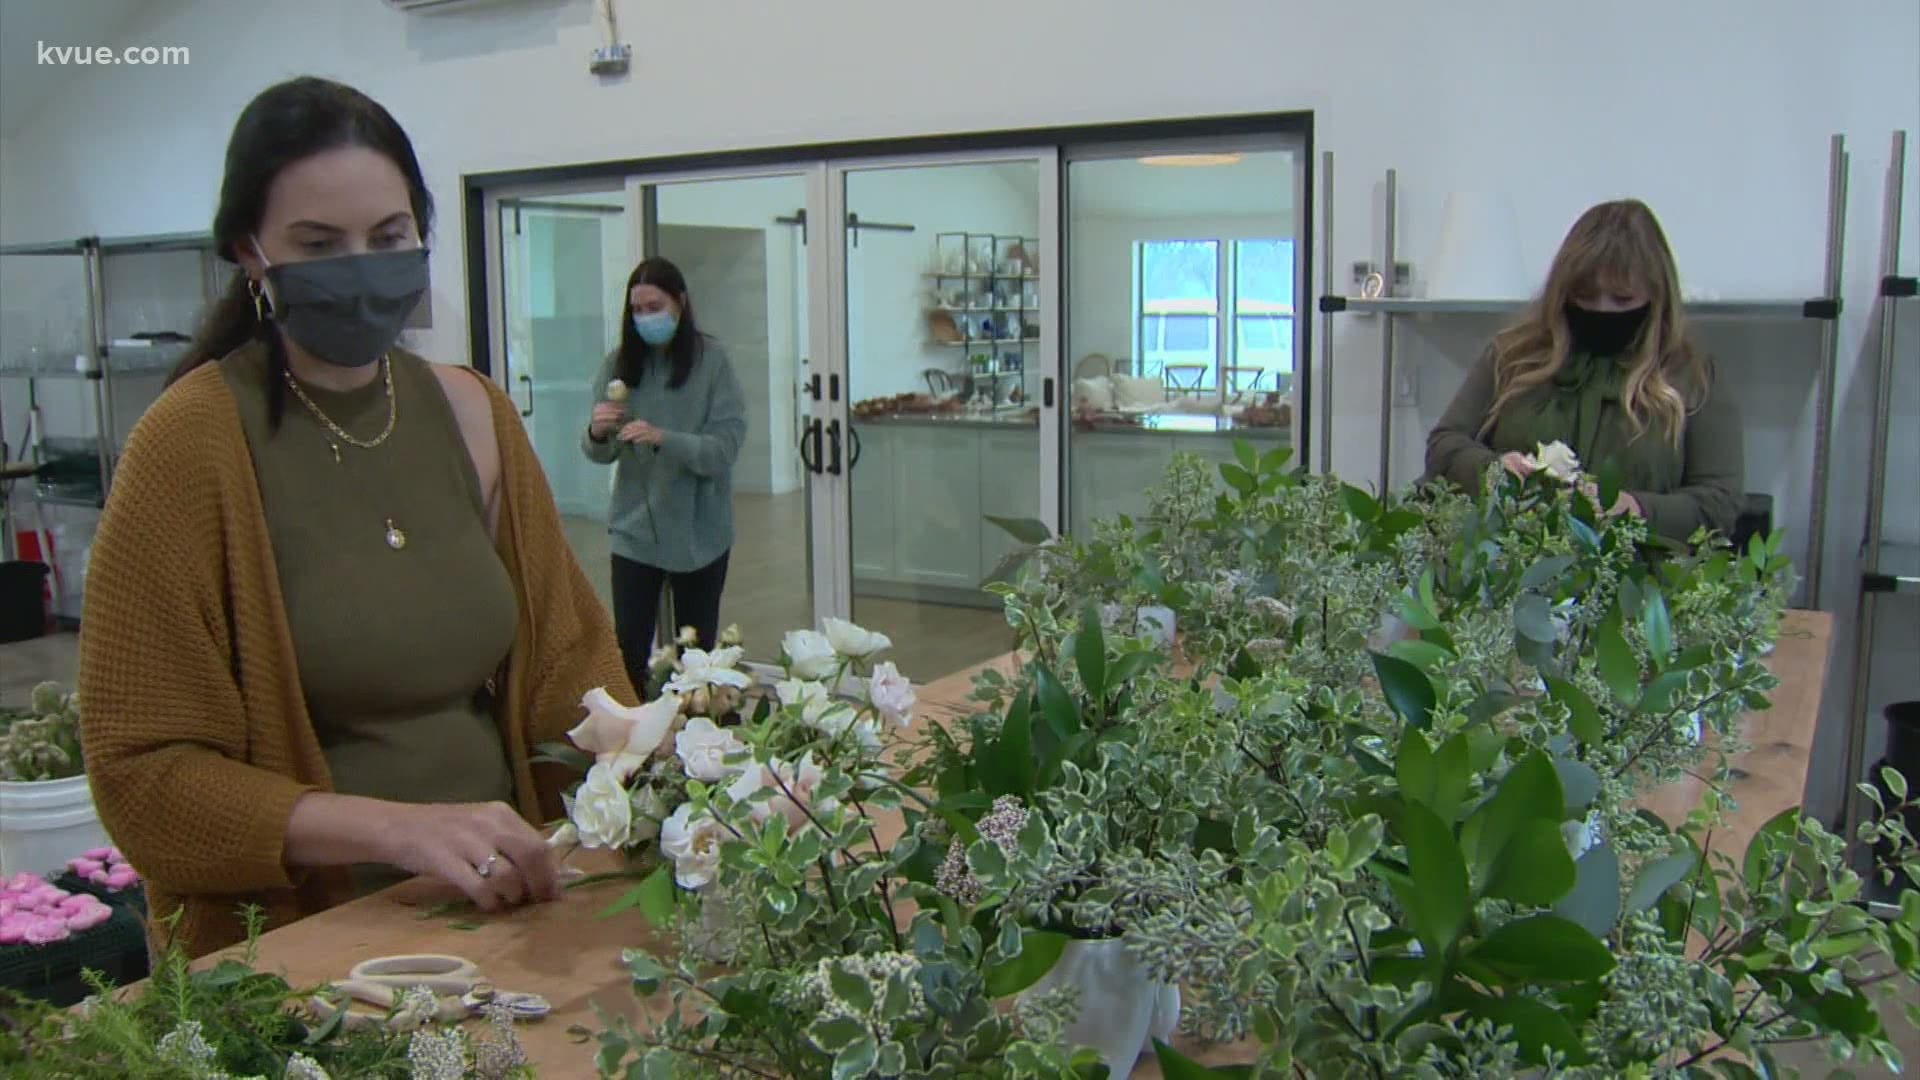 Change in wedding plans leads to flower delivery to Austin assisted living facility